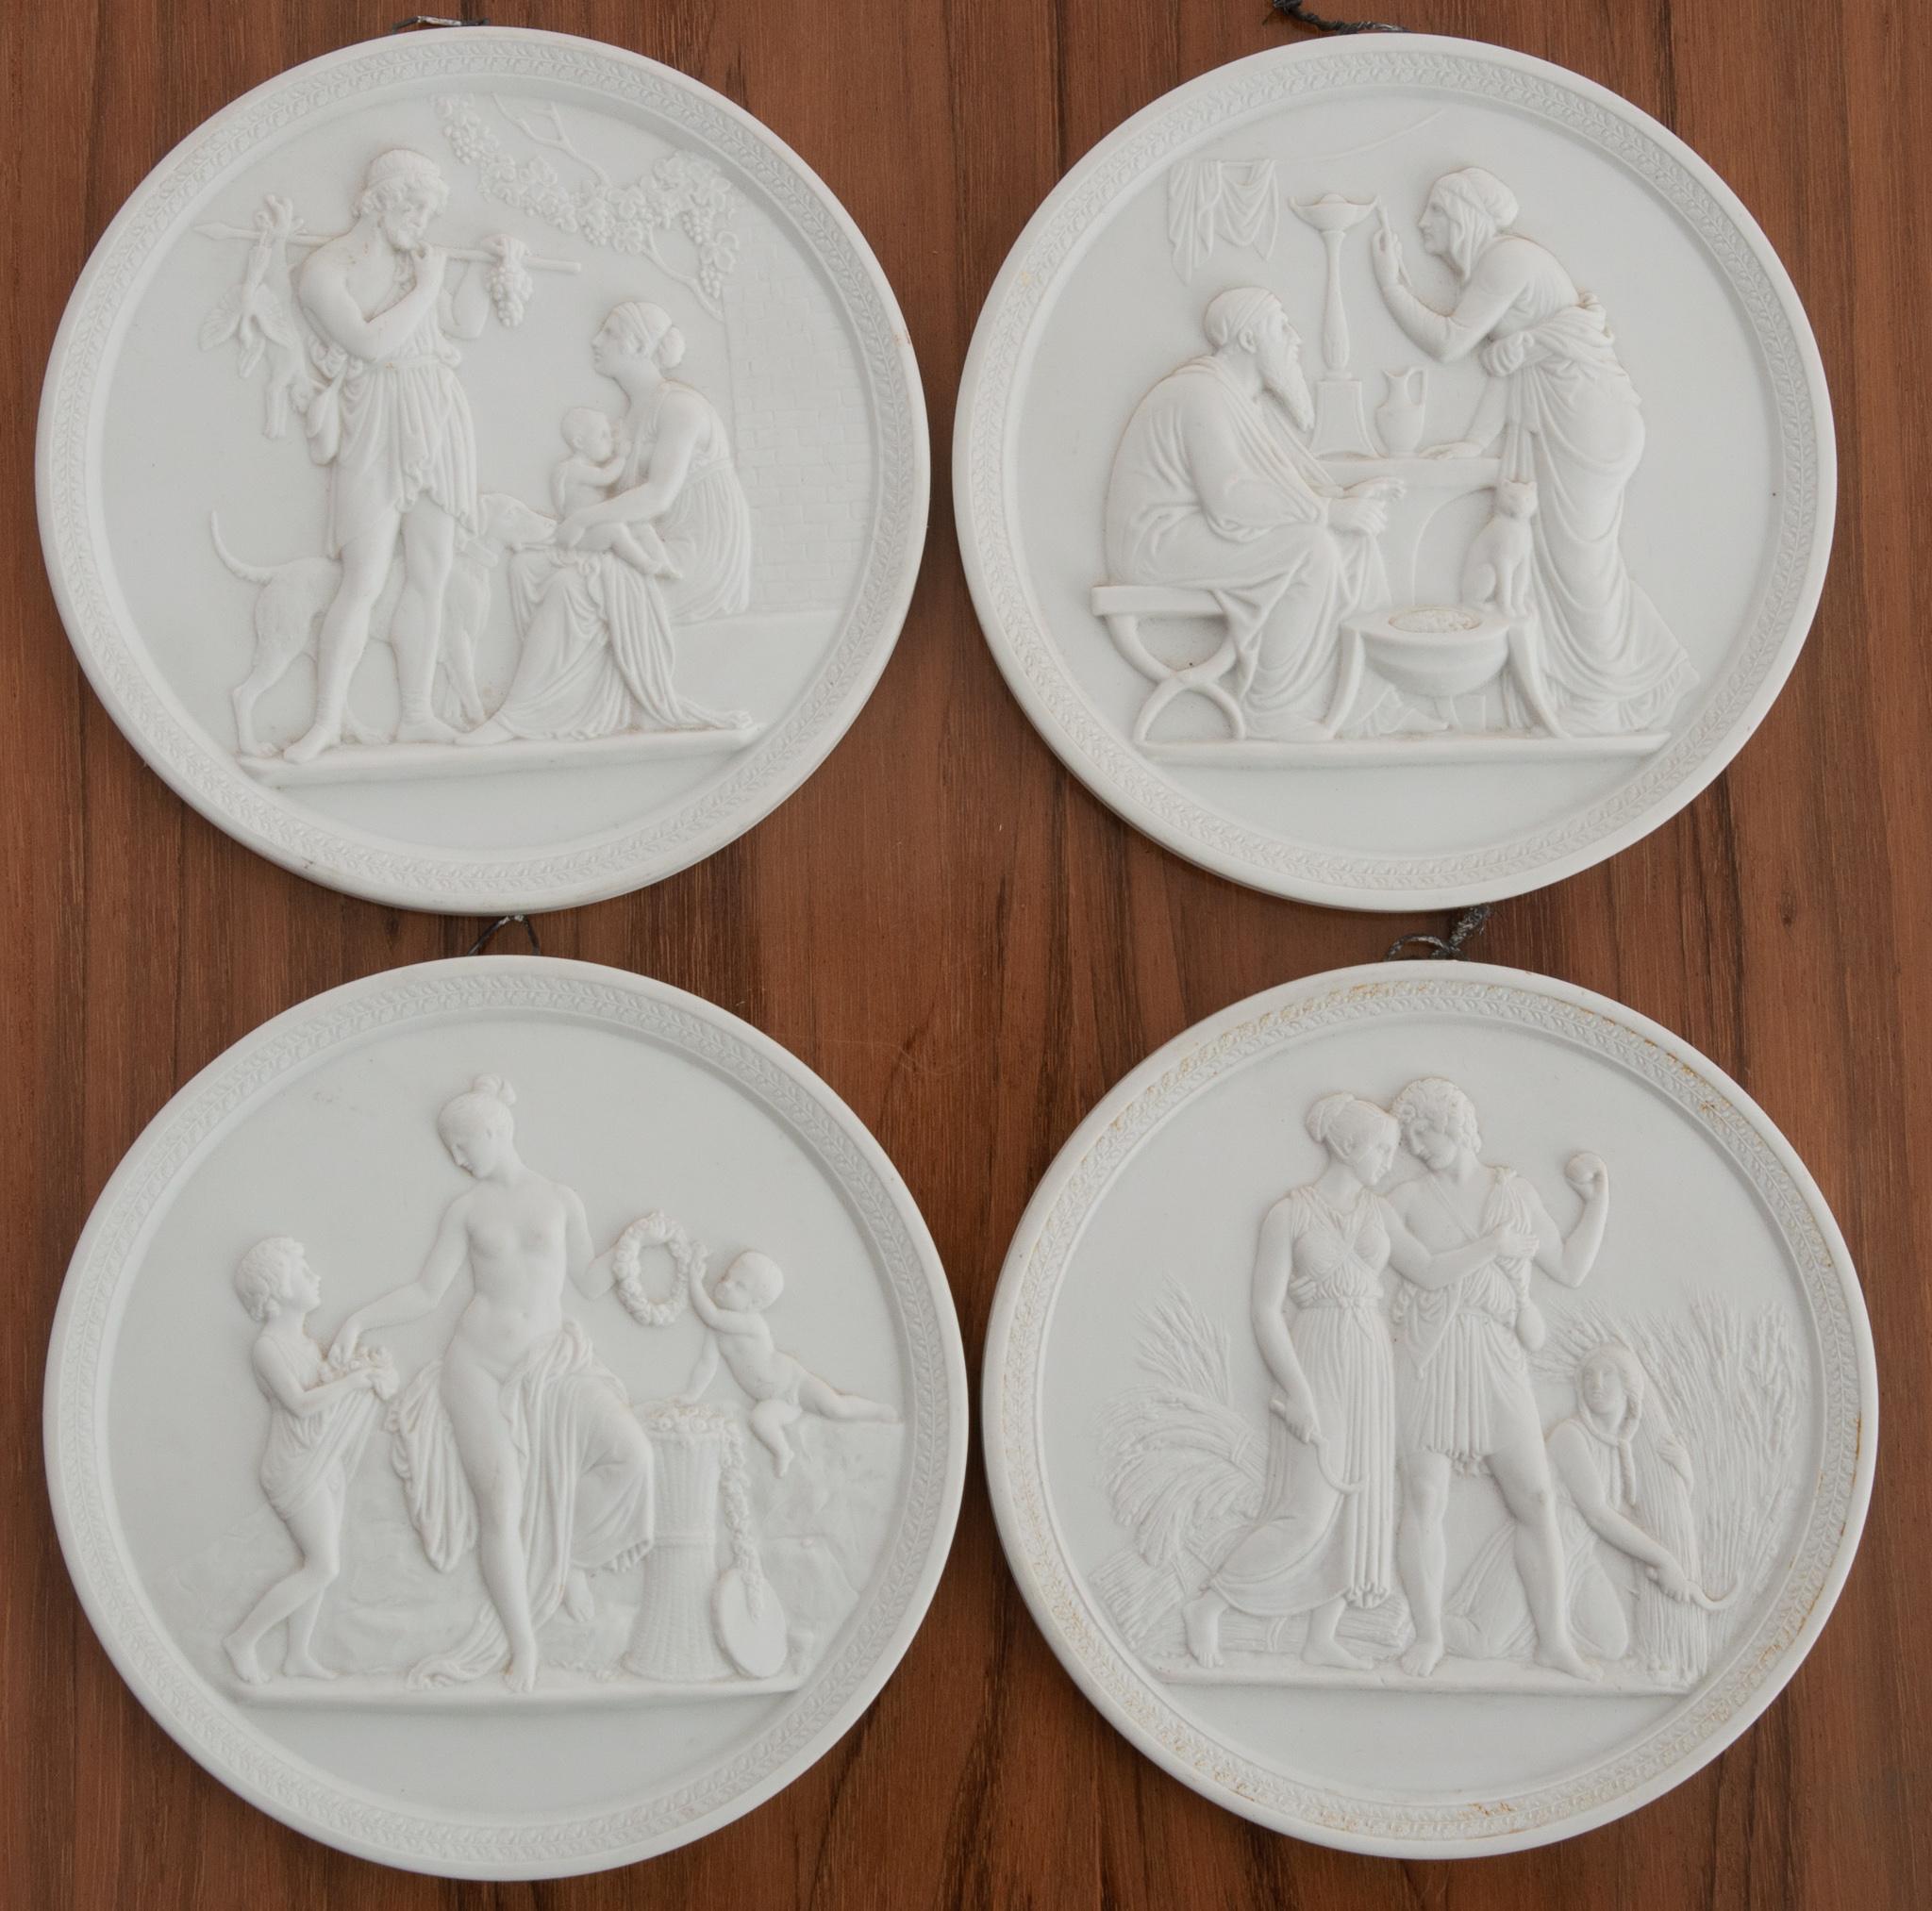 This set of four plaques are made of bisque porcelain by the Danish company, Royal Copenhagen. Stamped with Eneret on the back and has the distinct three blue waves and Royal Copenhagen backstamp. The neo-Classical, low relief designs depict the